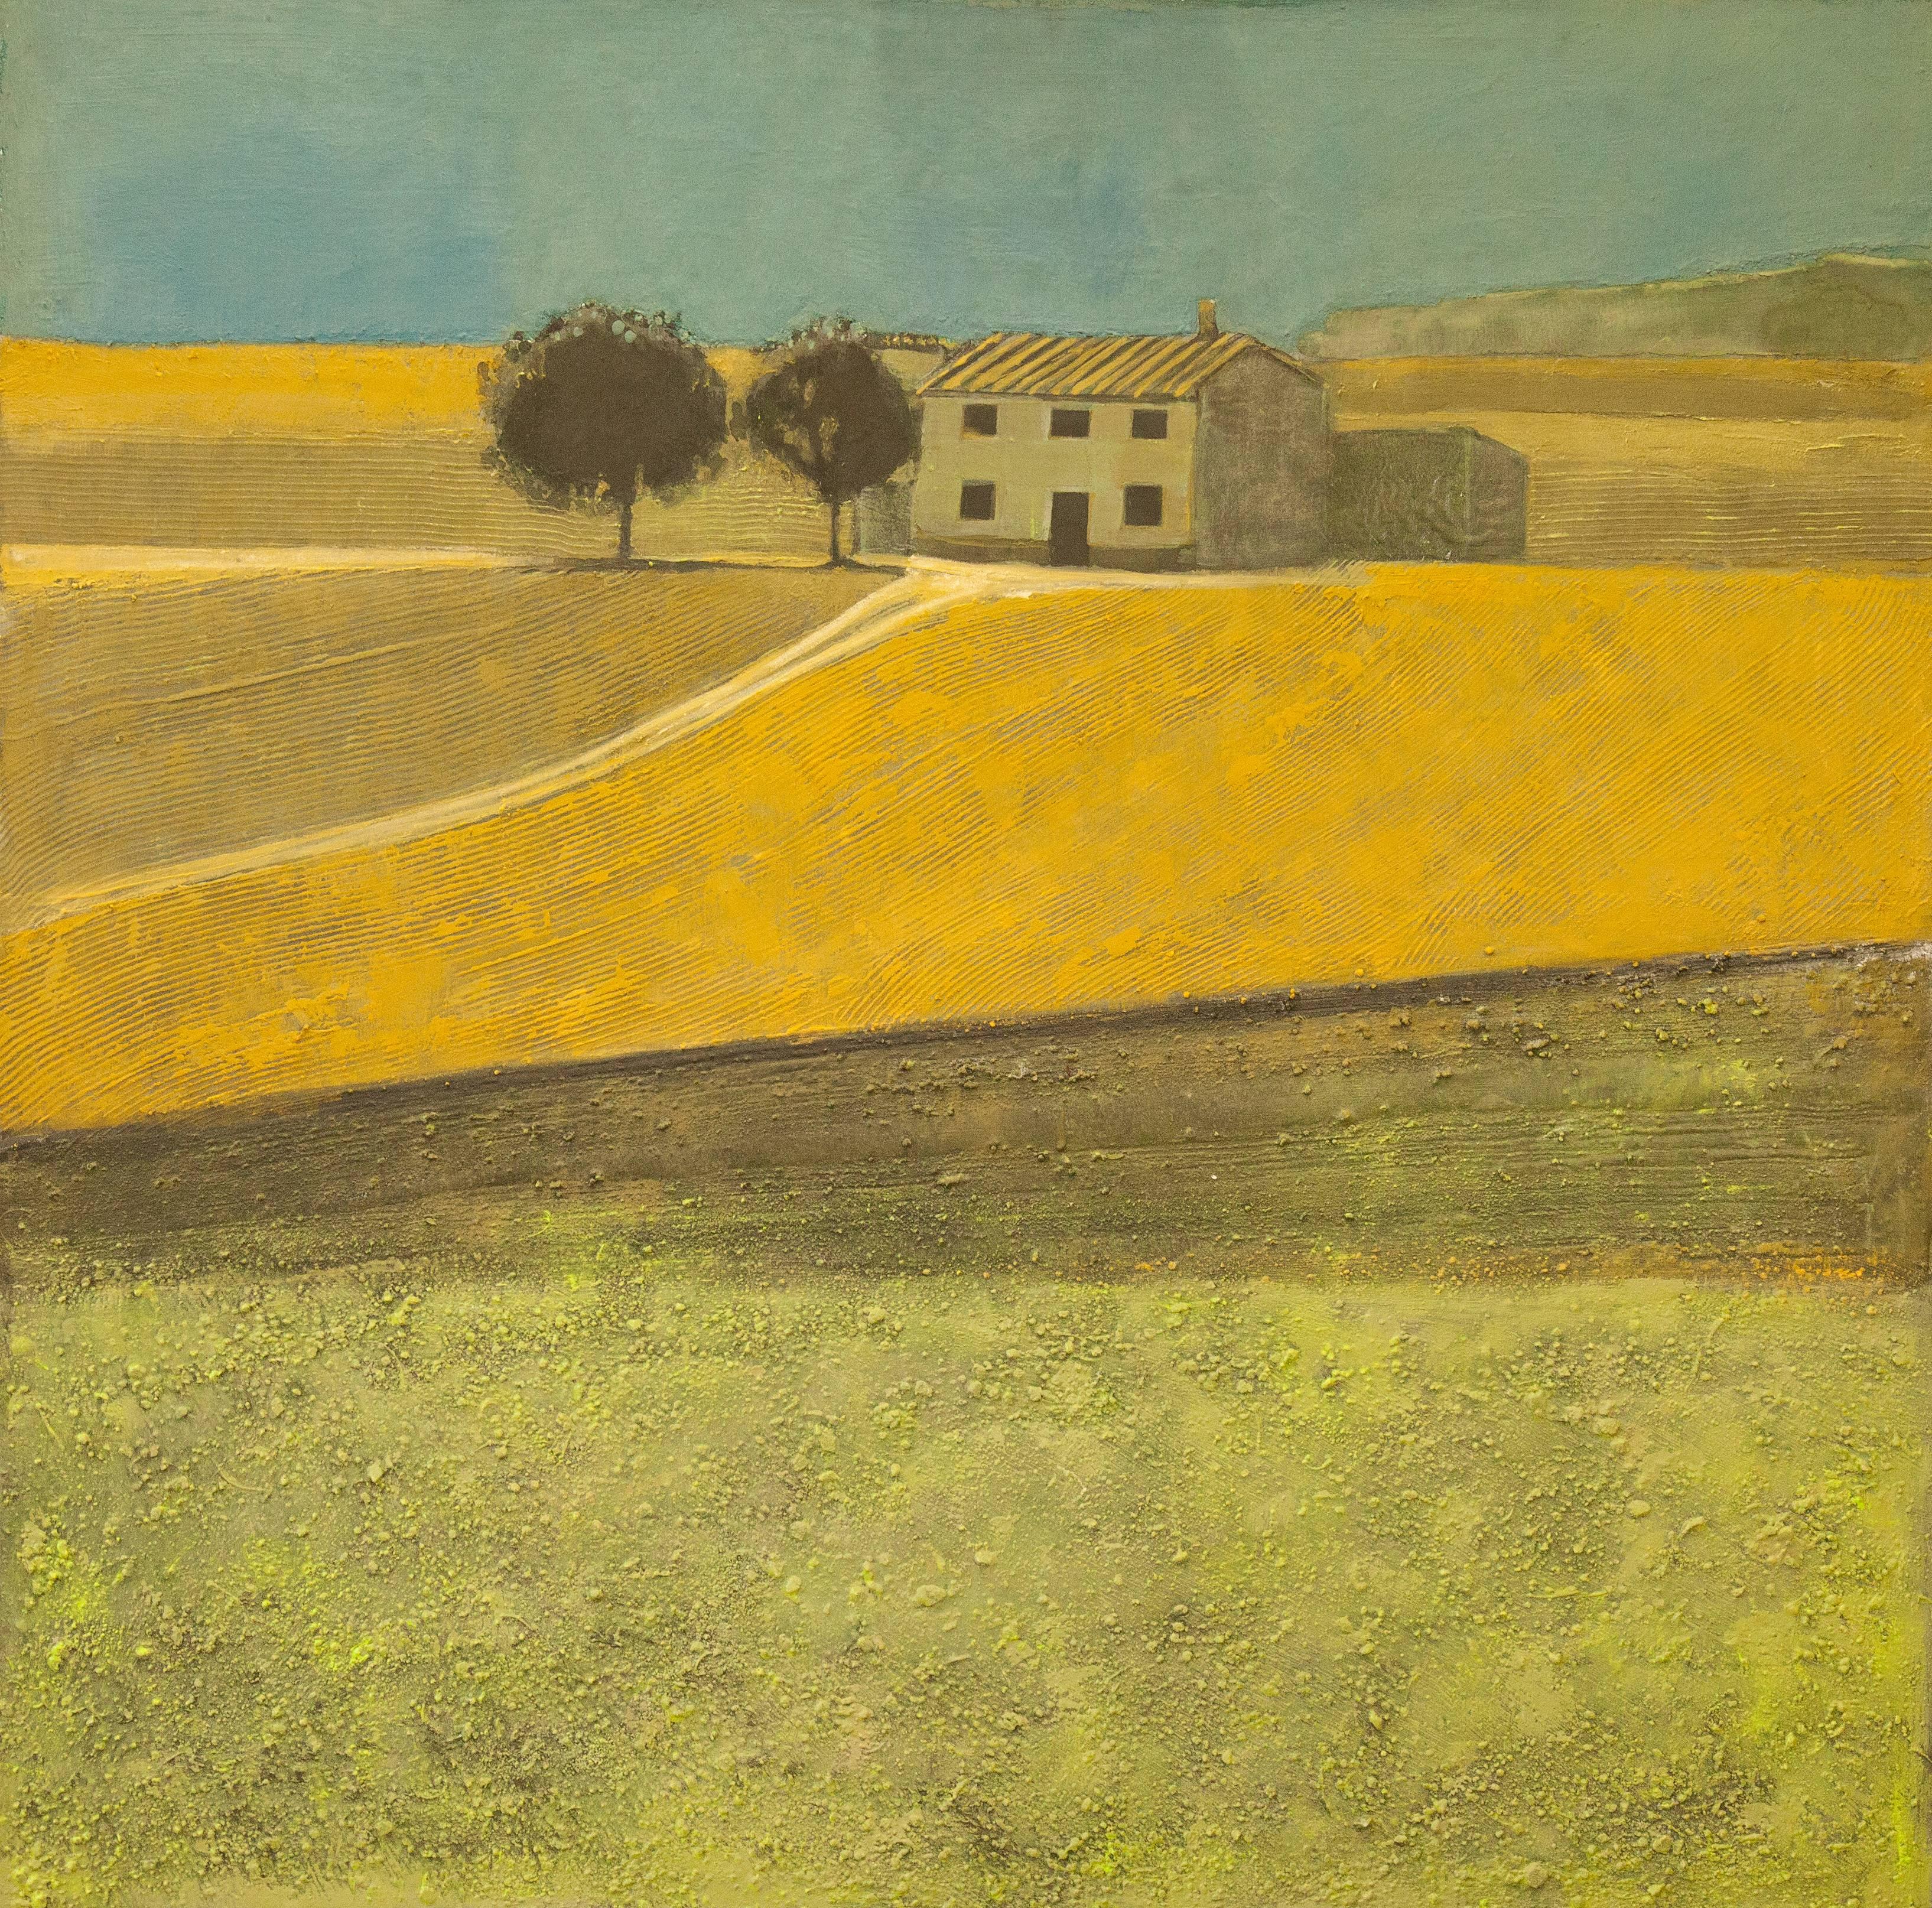 Bauman is a landscape painter, whose interest lies not in narrative, but in form defined by light. She is inspired by motifs as contrasting as the cultivated landscapes of the Mediterranean and the deserts of north Africa and Australia.

Yellow